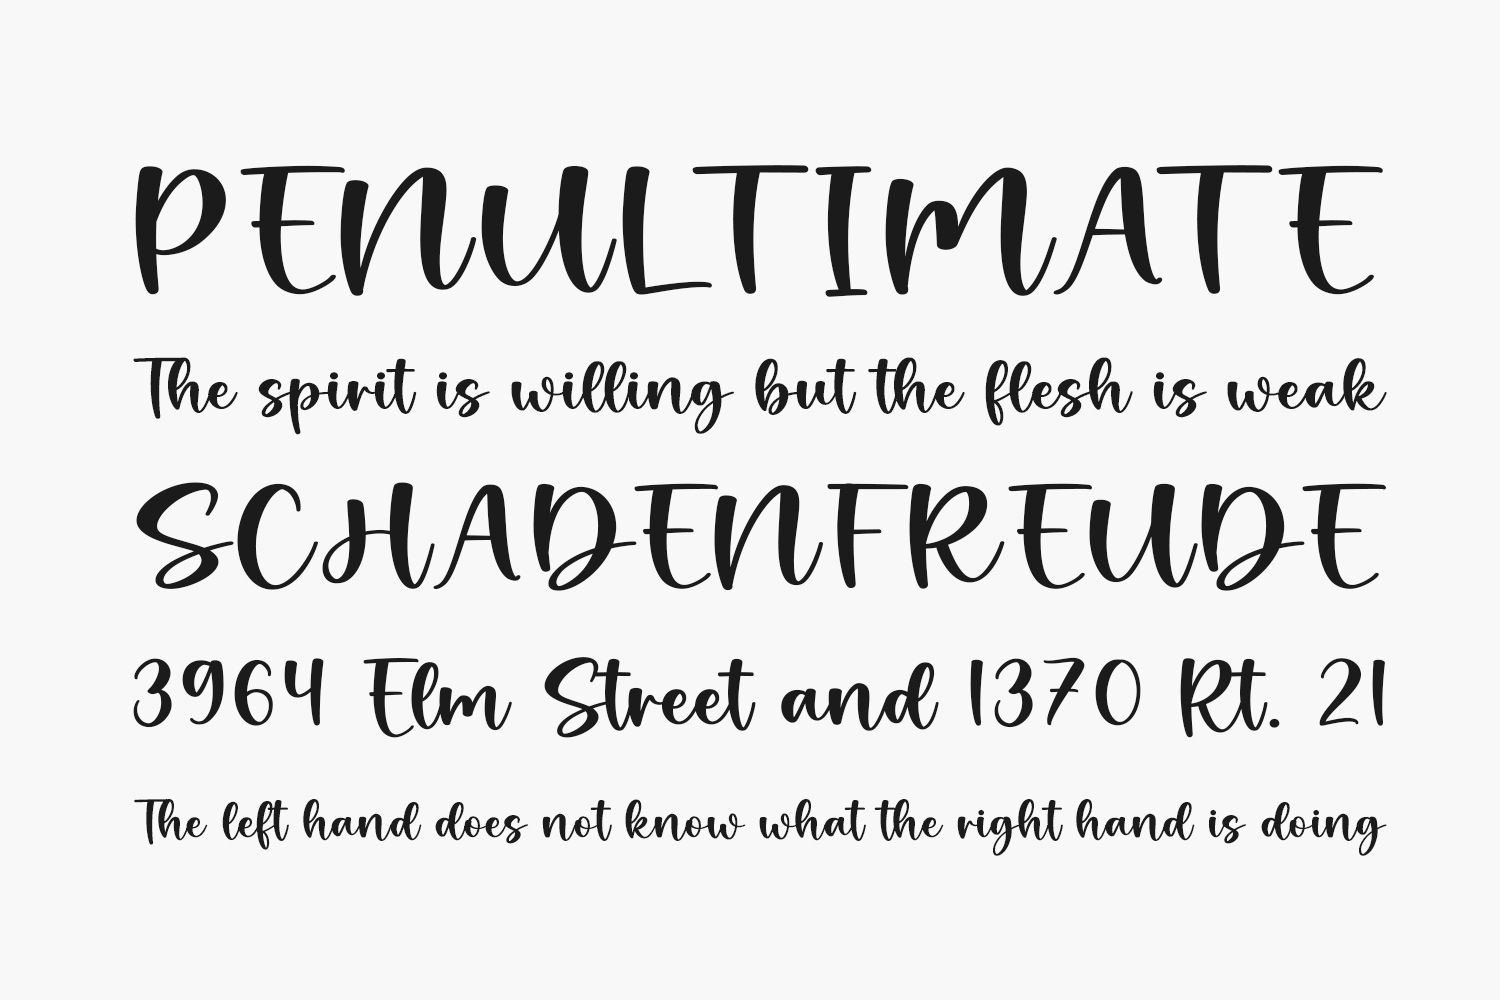 Just Believe Free Font